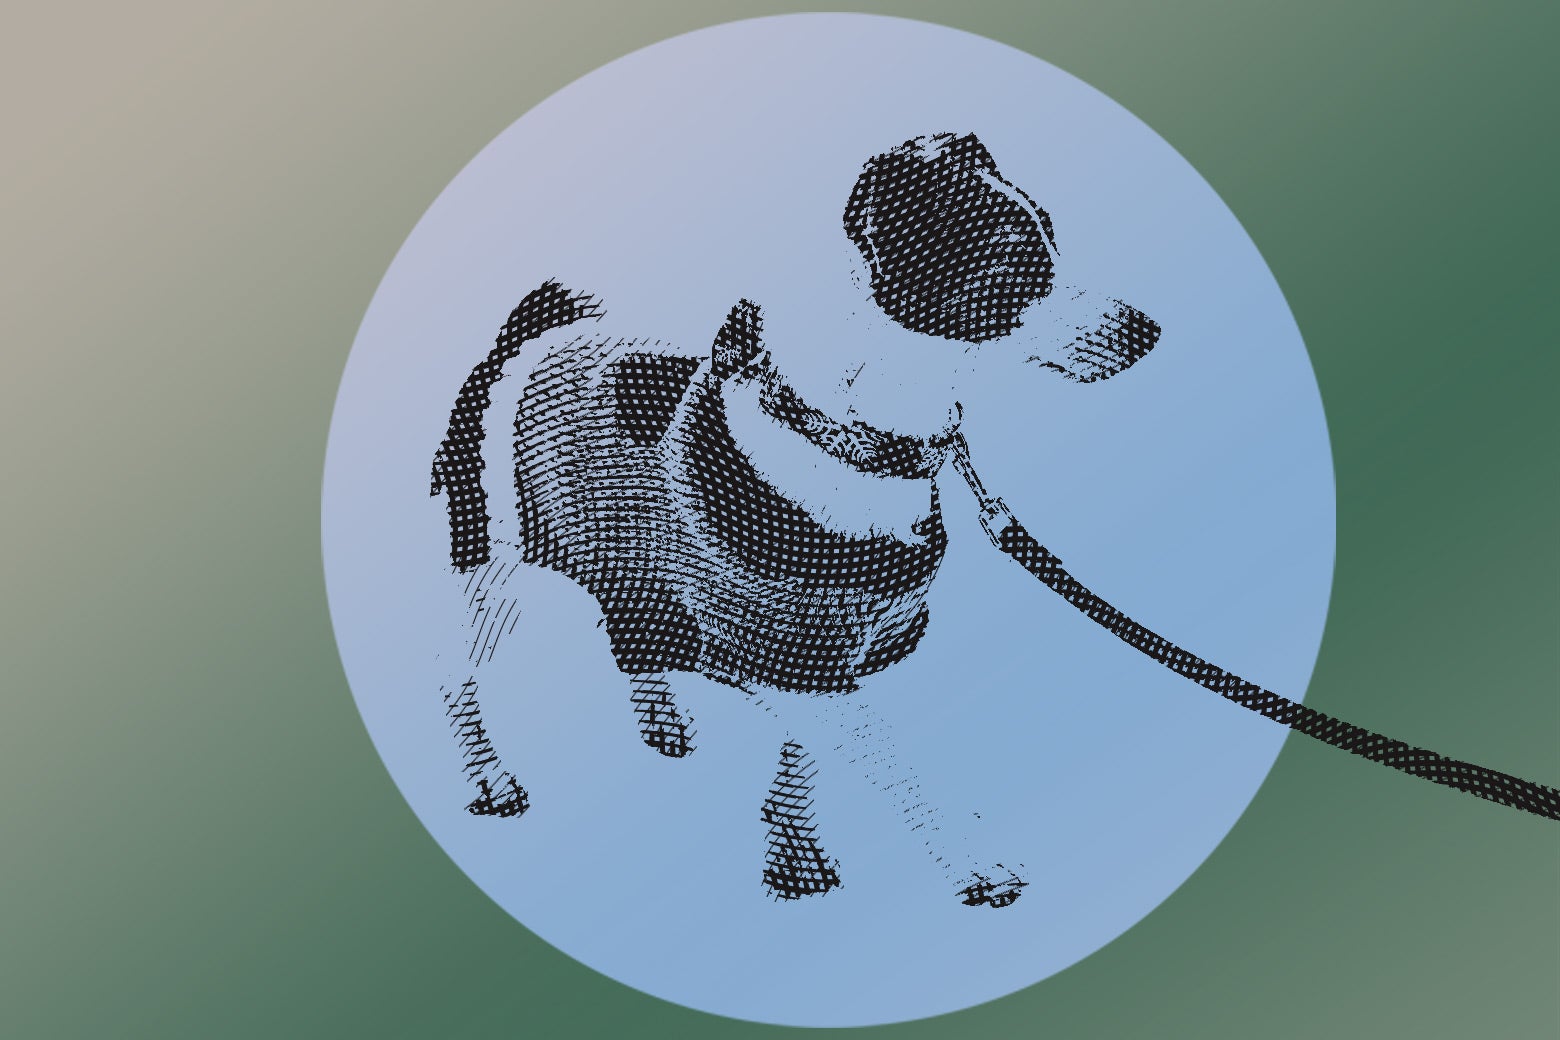 A dog wearing a sweater on a leash